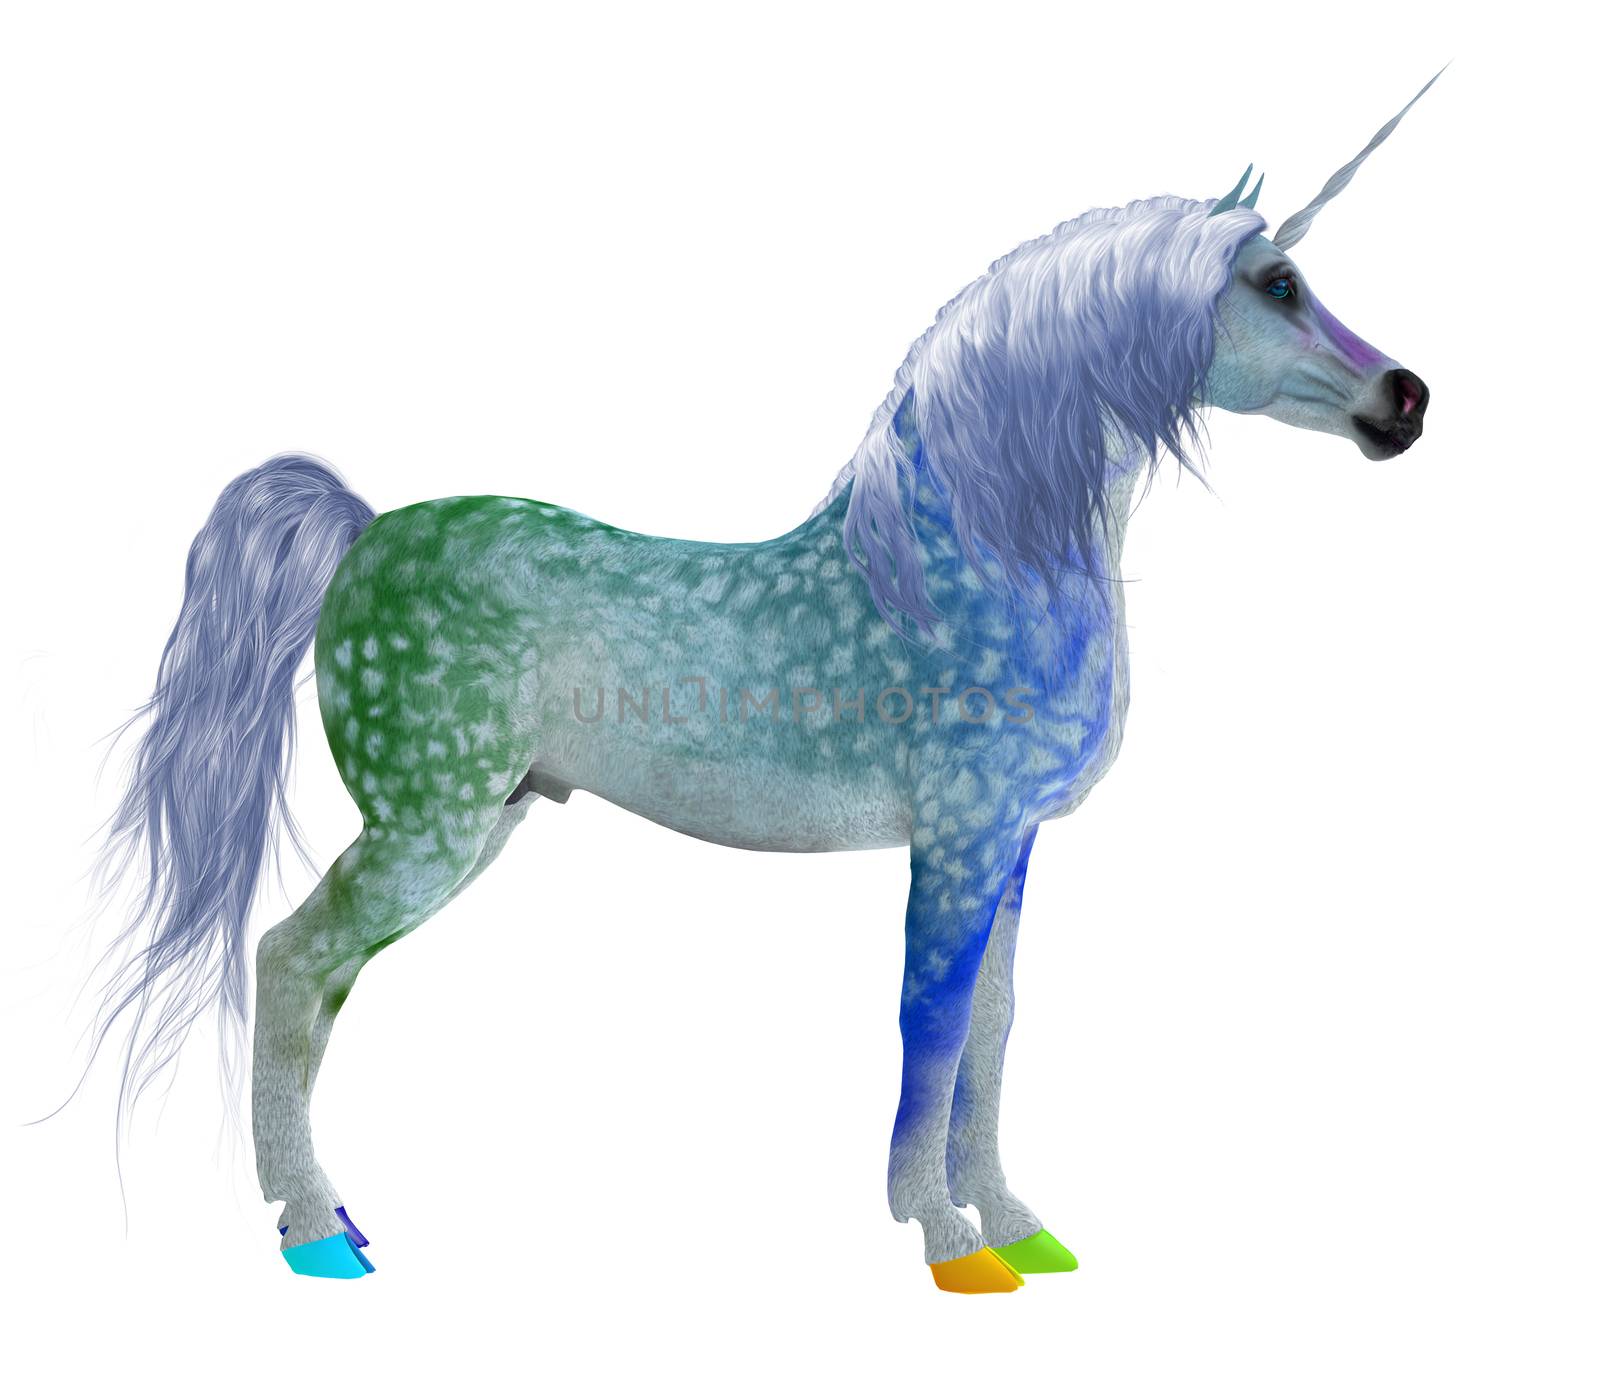 This colorful fantasy unicorn is a legendary creature of mythology with a pointed forehead spiral horn.